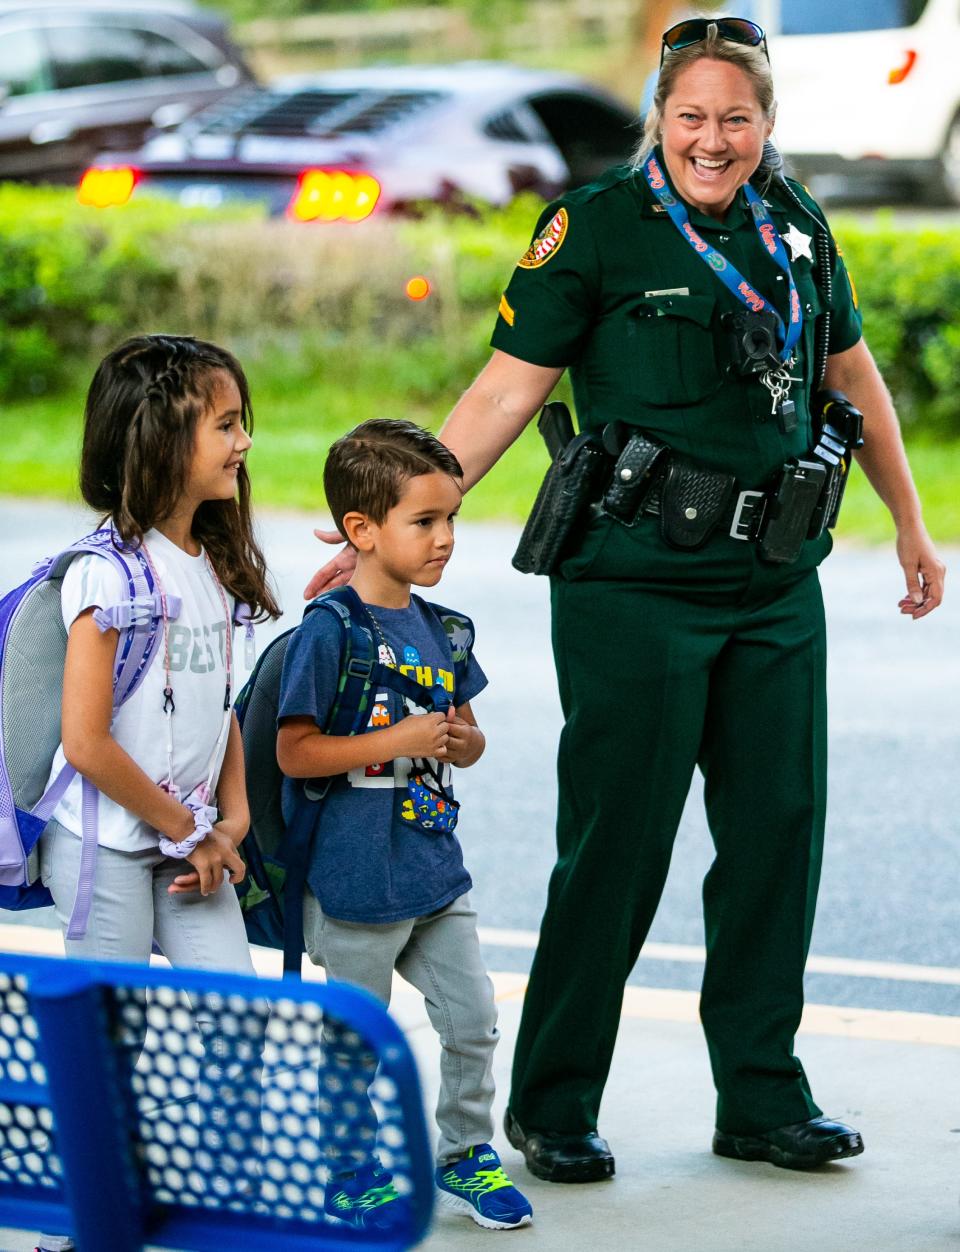 Shady Hill Elementary School Resource Officer Rochelle Mims welcomes Zoey Rivera, 7, and her brother Liam, 5, to the first day of school on Aug. 10.